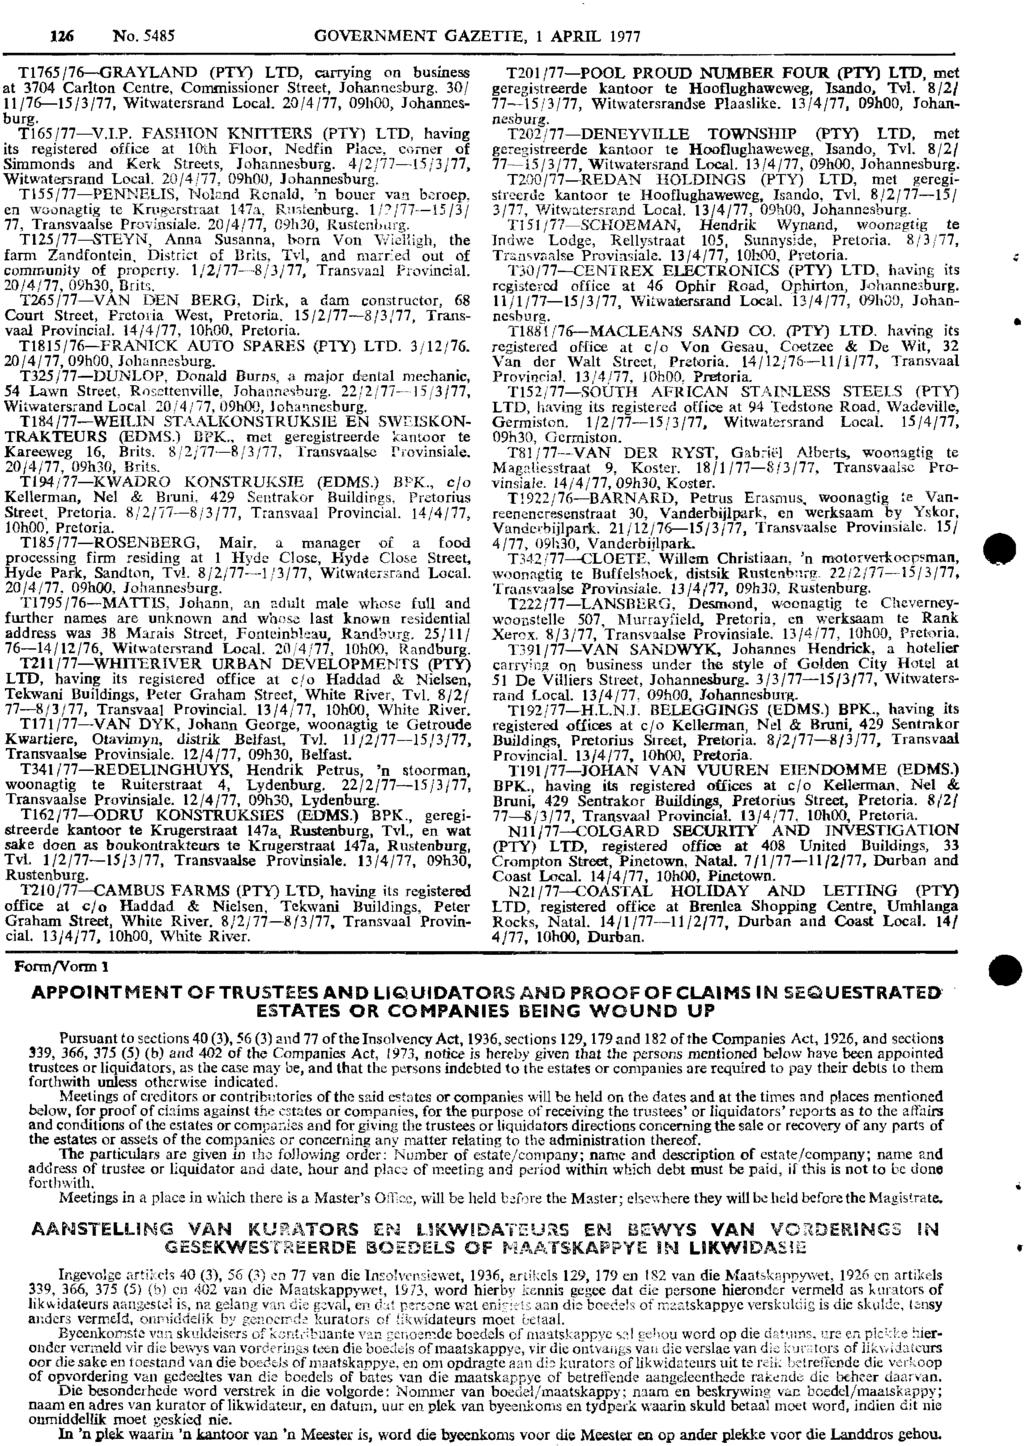 U6 No. 5485 GOVERNMENT GAZETTE, 1 APRIL 1977 T1765/76-GRAYLAND (PTY) LTD, carrying on business at 3704 Carlton Centre, Commissioner Street, Johannesburg. 30/ 11 /76-15/3/77, Witwatersrand Local.